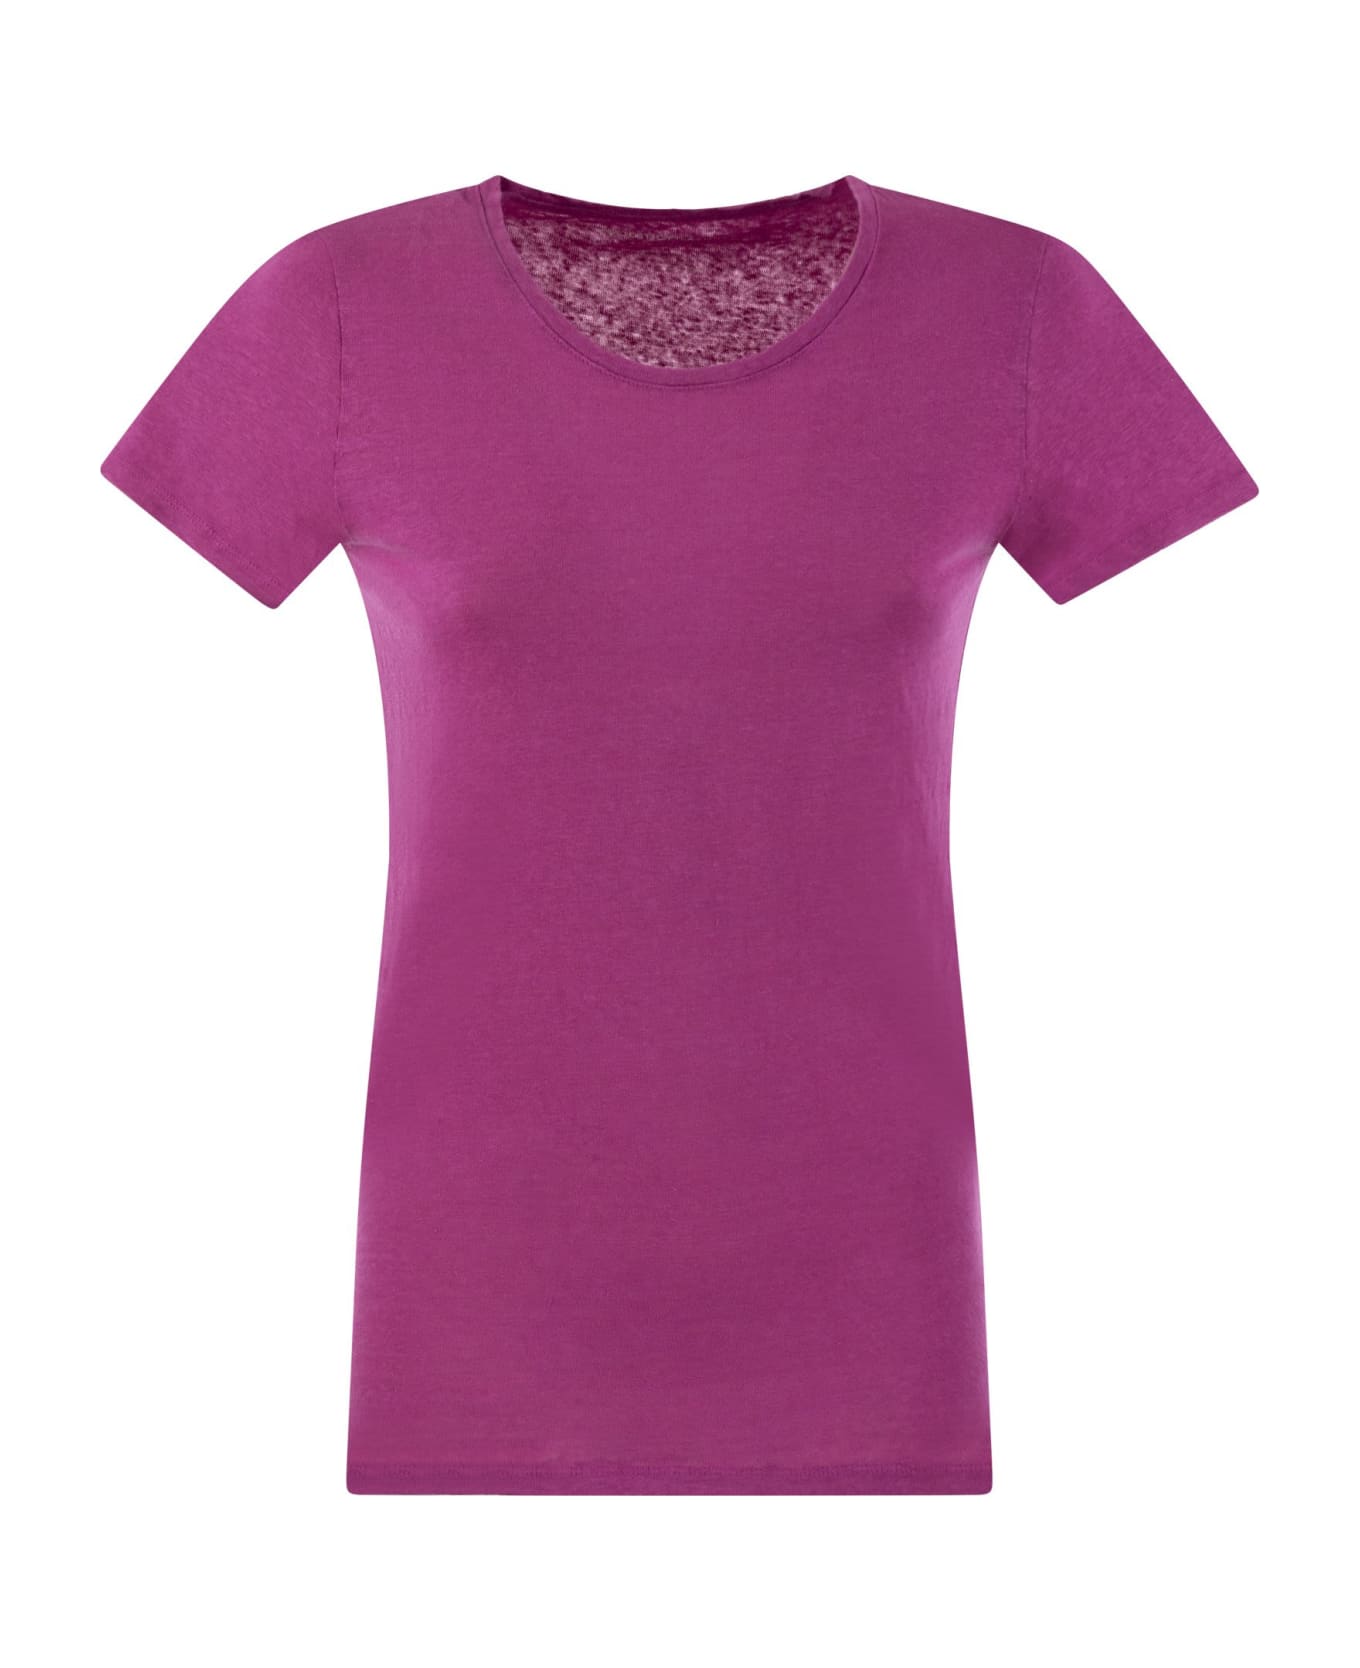 Majestic Filatures Crew-neck T-shirt In Linen And Short Sleeve - Fuchsia